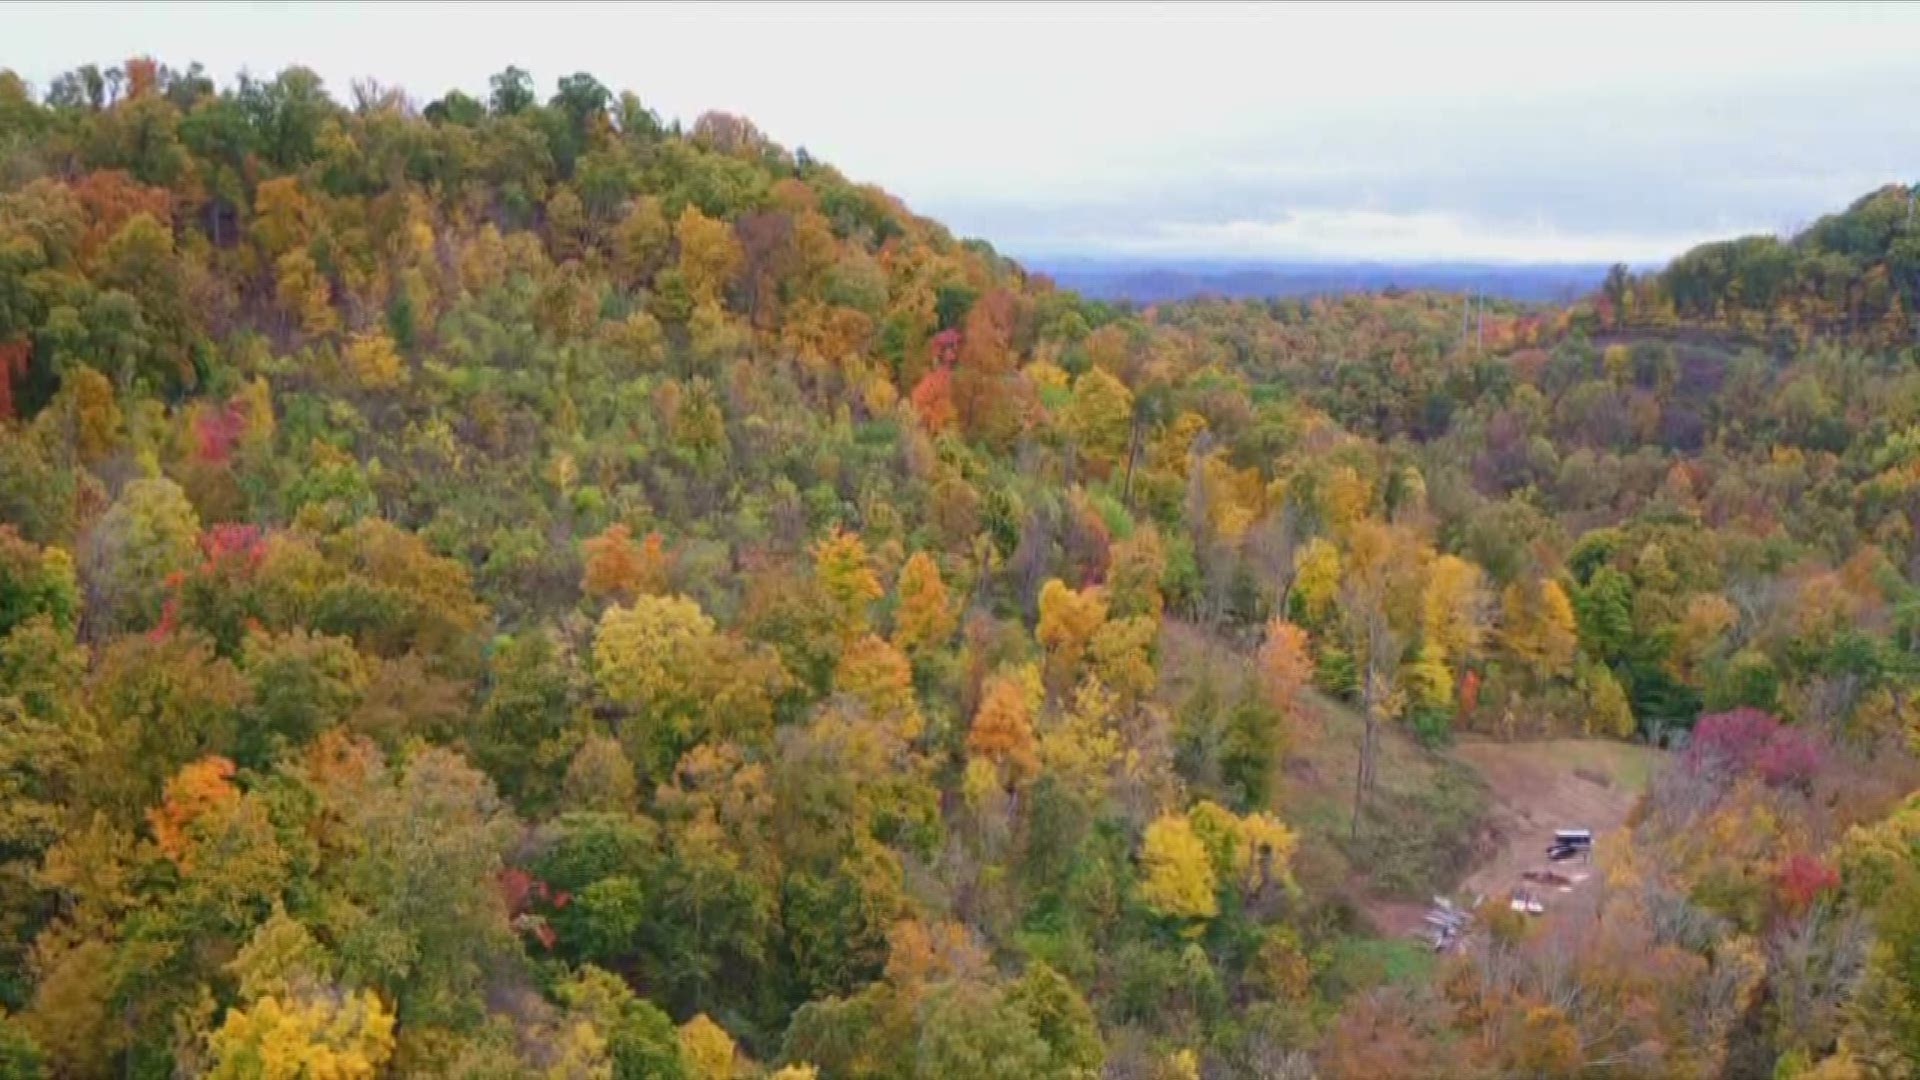 The fall colors were bright and beautiful in East Tennessee for the first week of November.